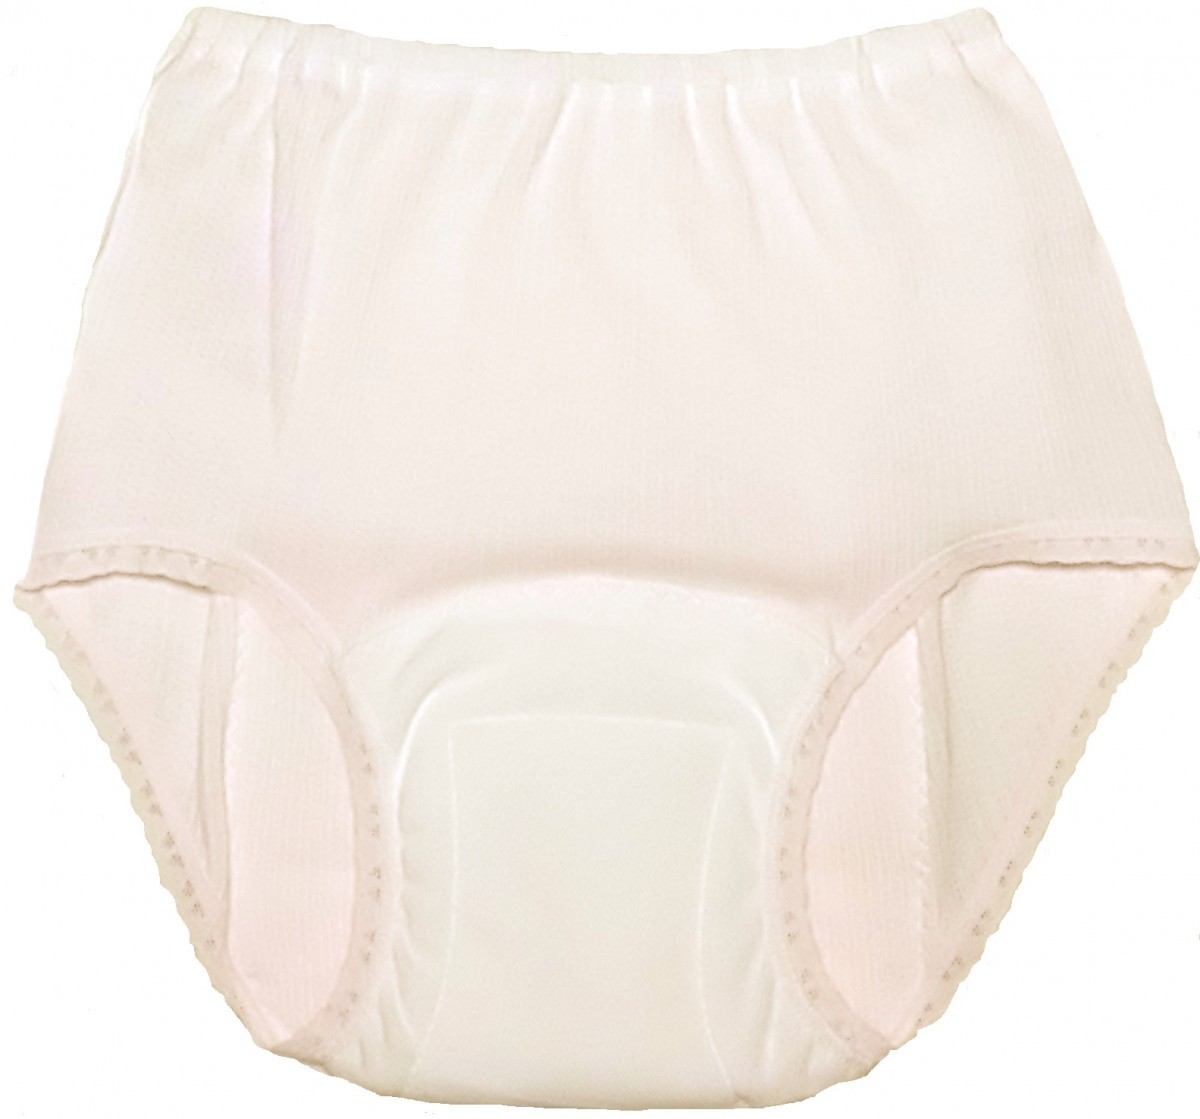  incontinence pants incontinence woman . water amount 150cc [3 sheets set ] product number 32029